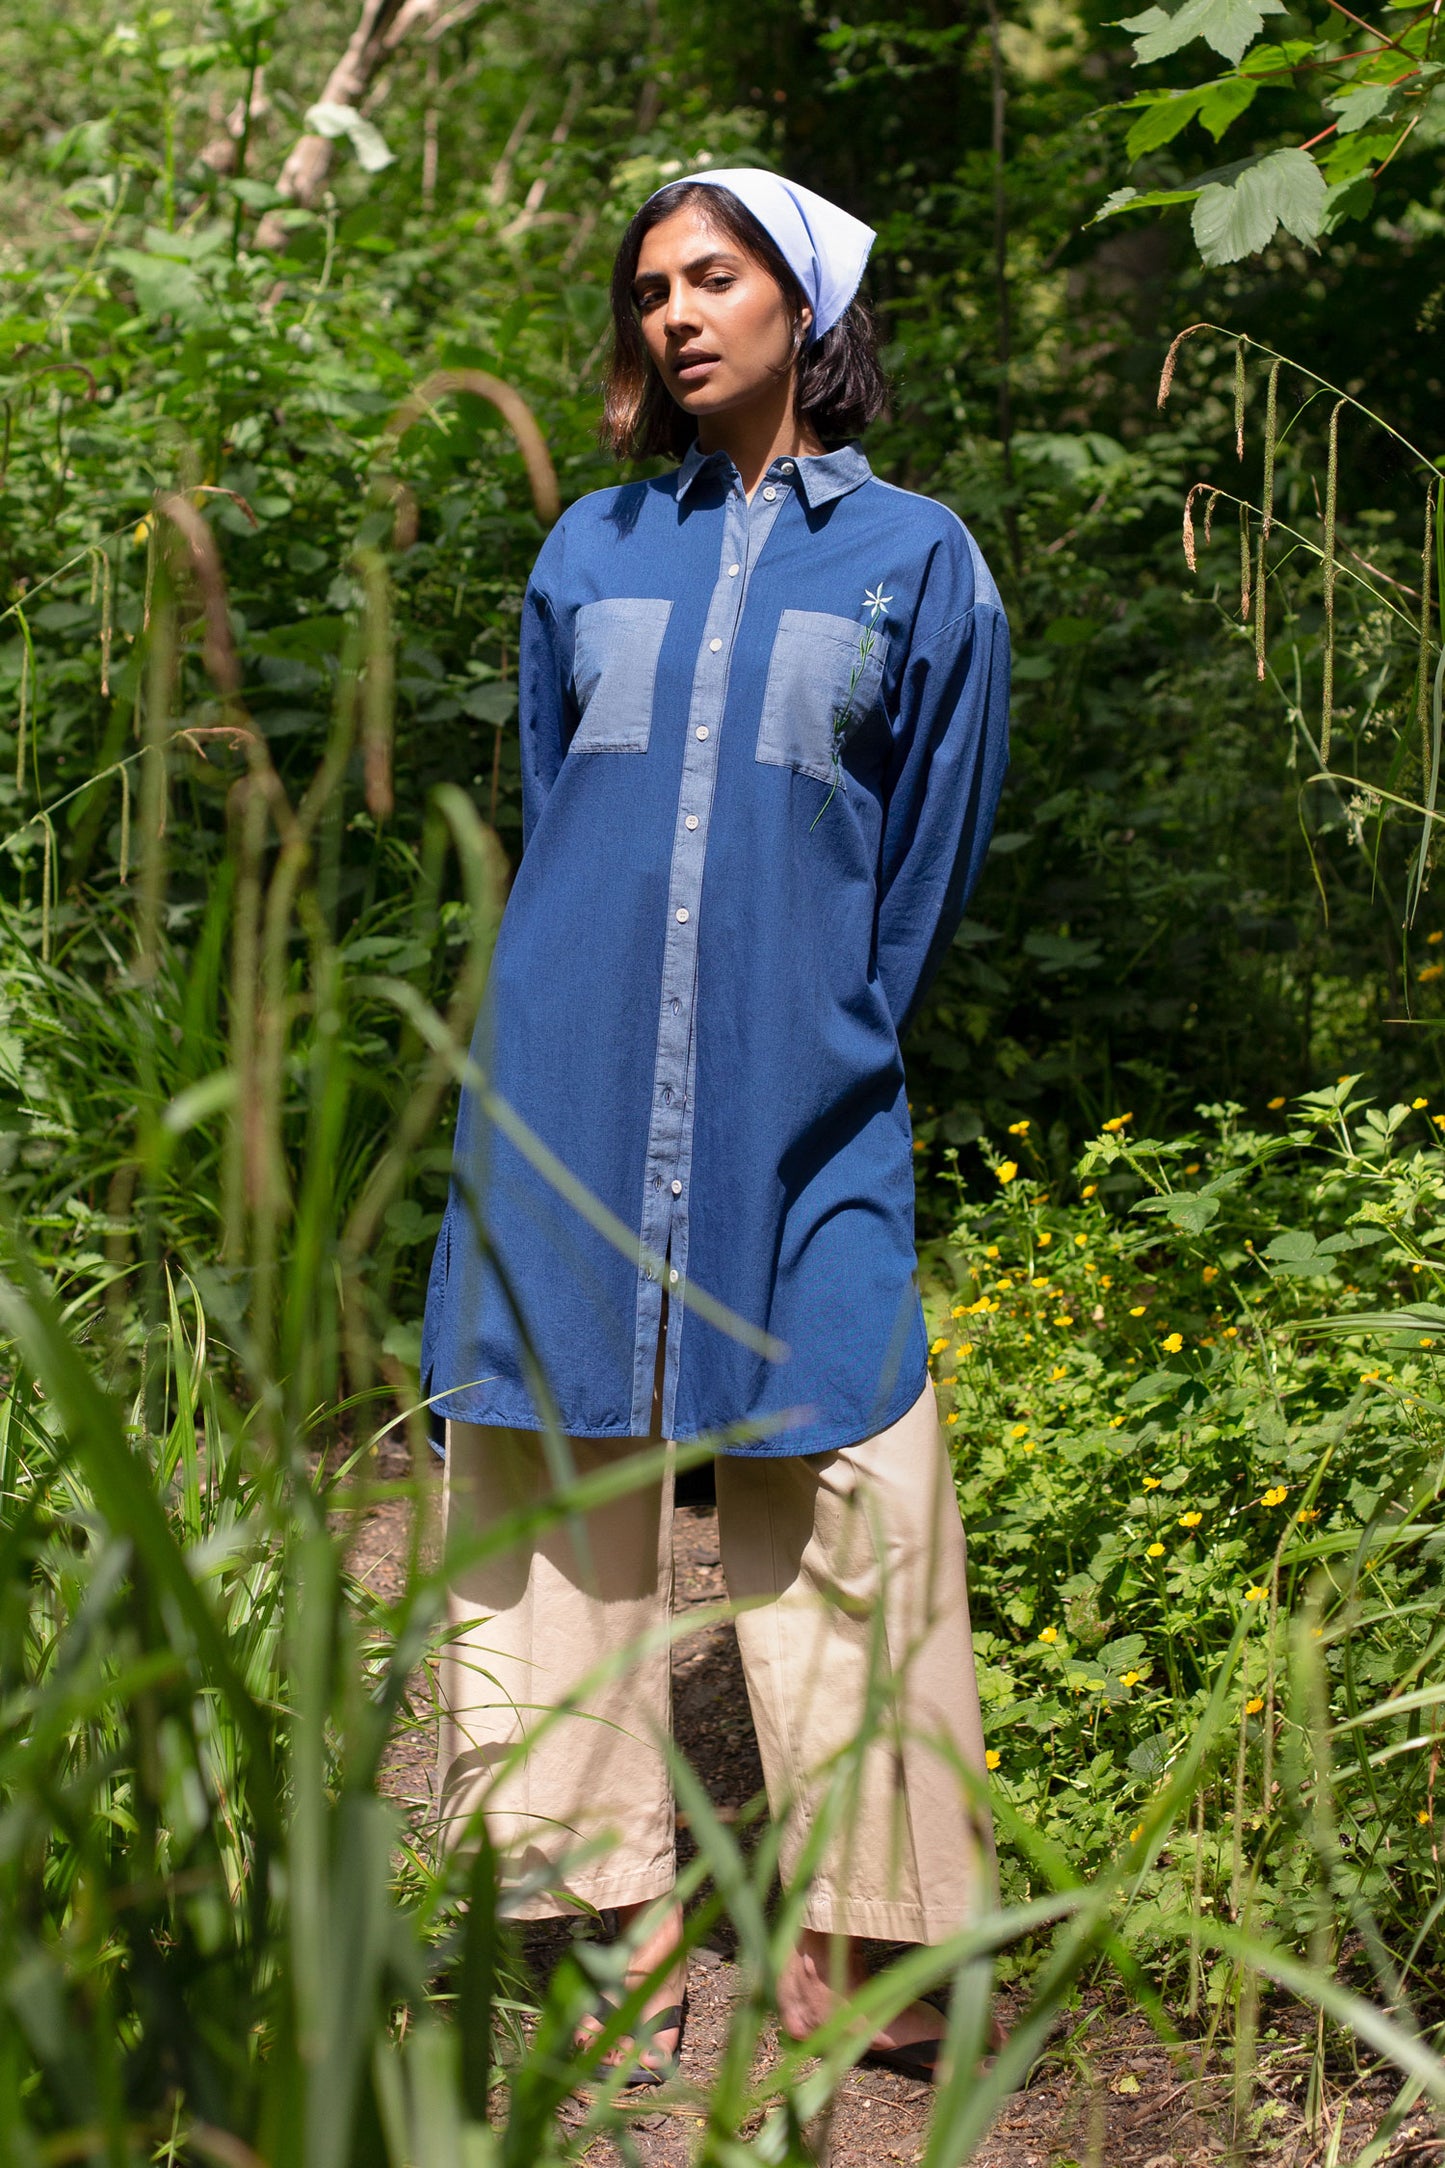 Model stands surrounded by green nature, wearing the Etta Oversized Japanese Denim Shirtdress, woven over tan trousers, with a blue bandana in recycled cotton. Hands clasped behind her back.